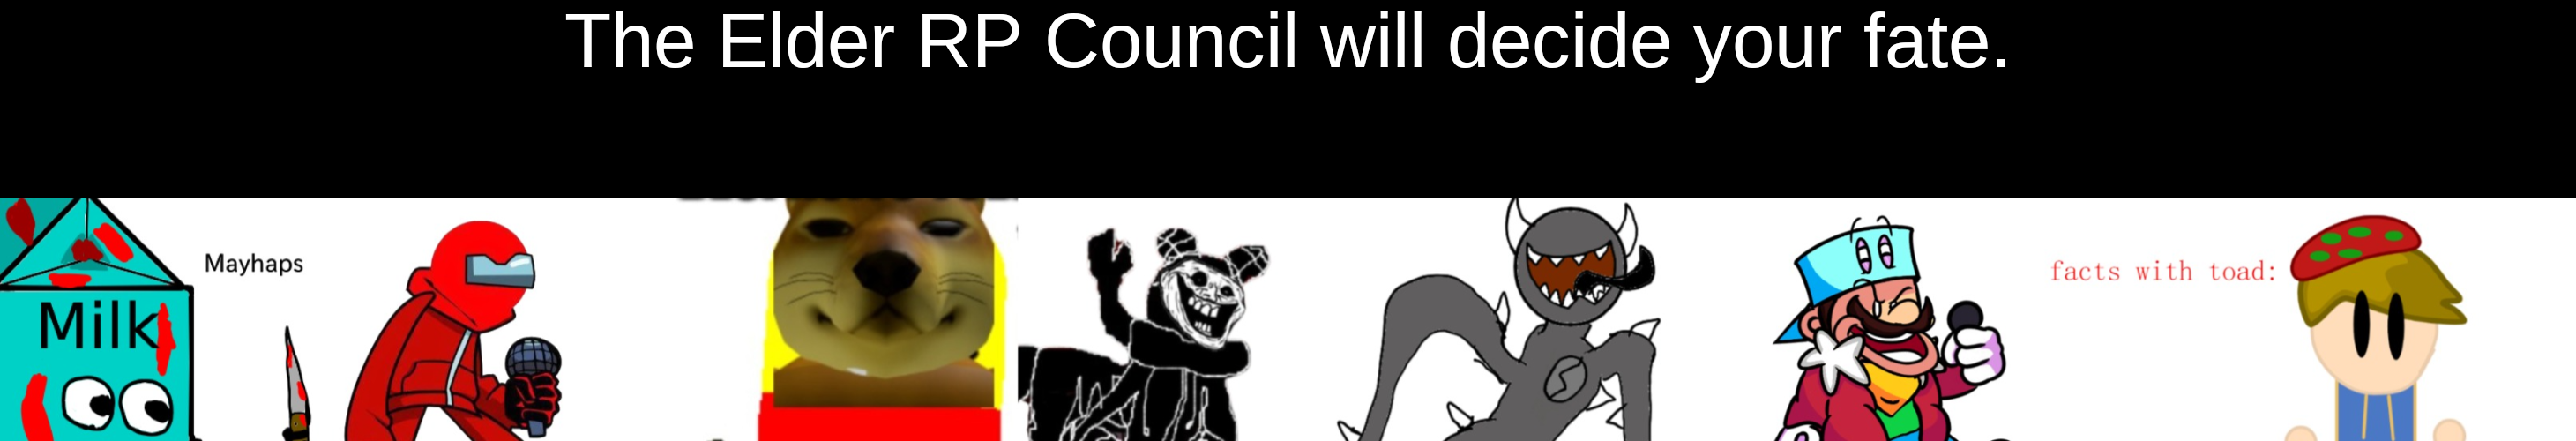 the elder rp council will decide your fate Blank Meme Template